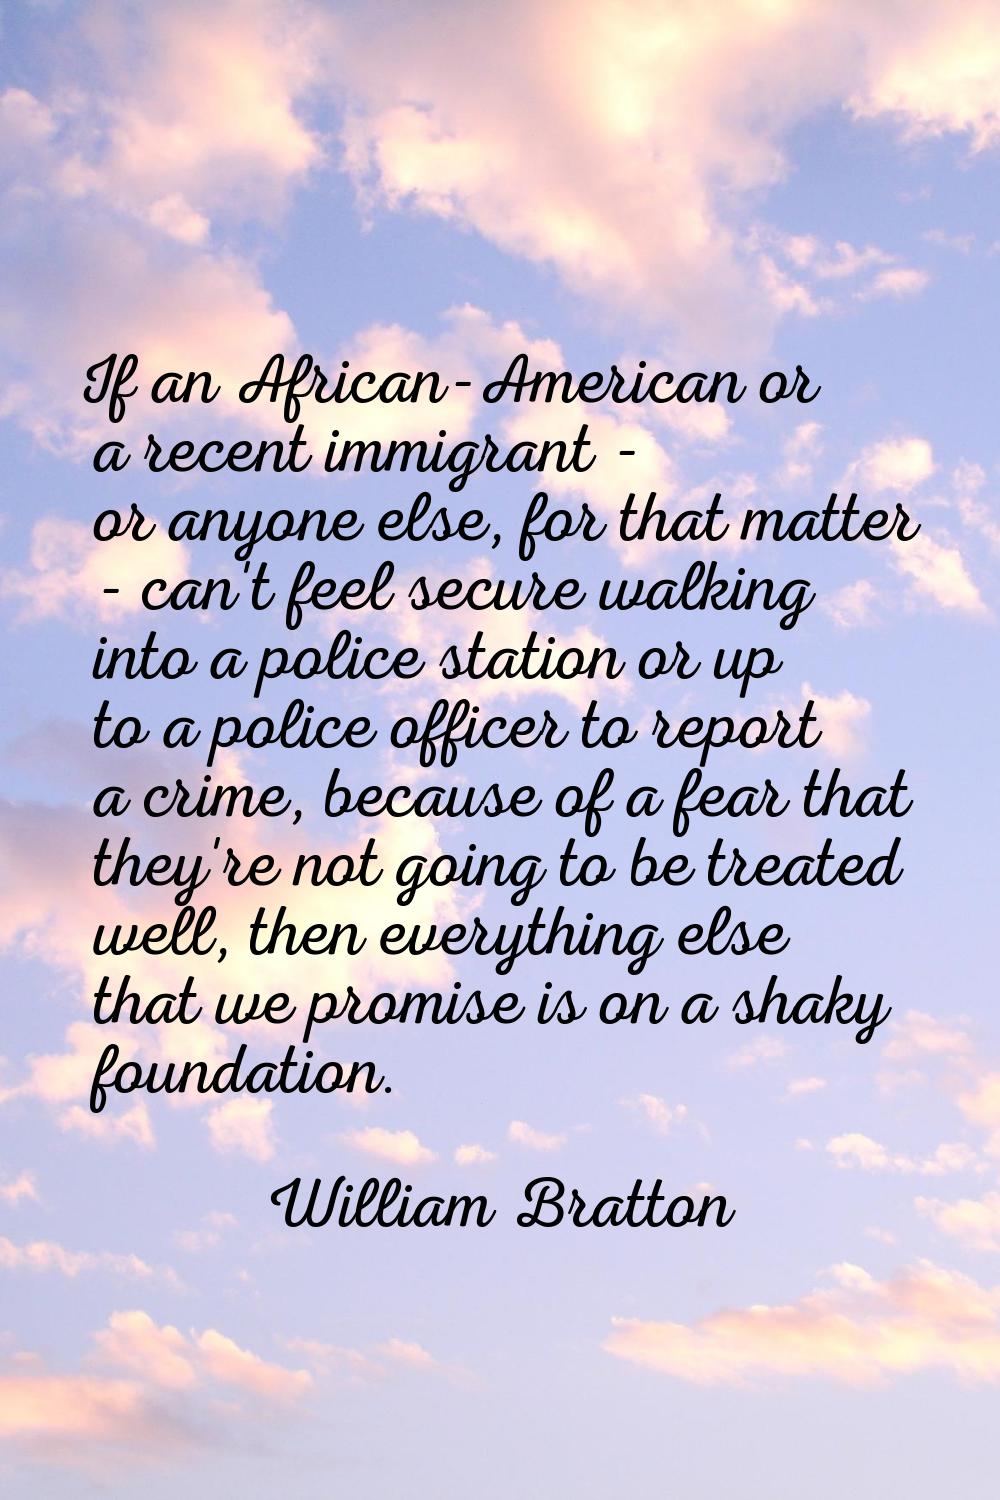 If an African-American or a recent immigrant - or anyone else, for that matter - can't feel secure 